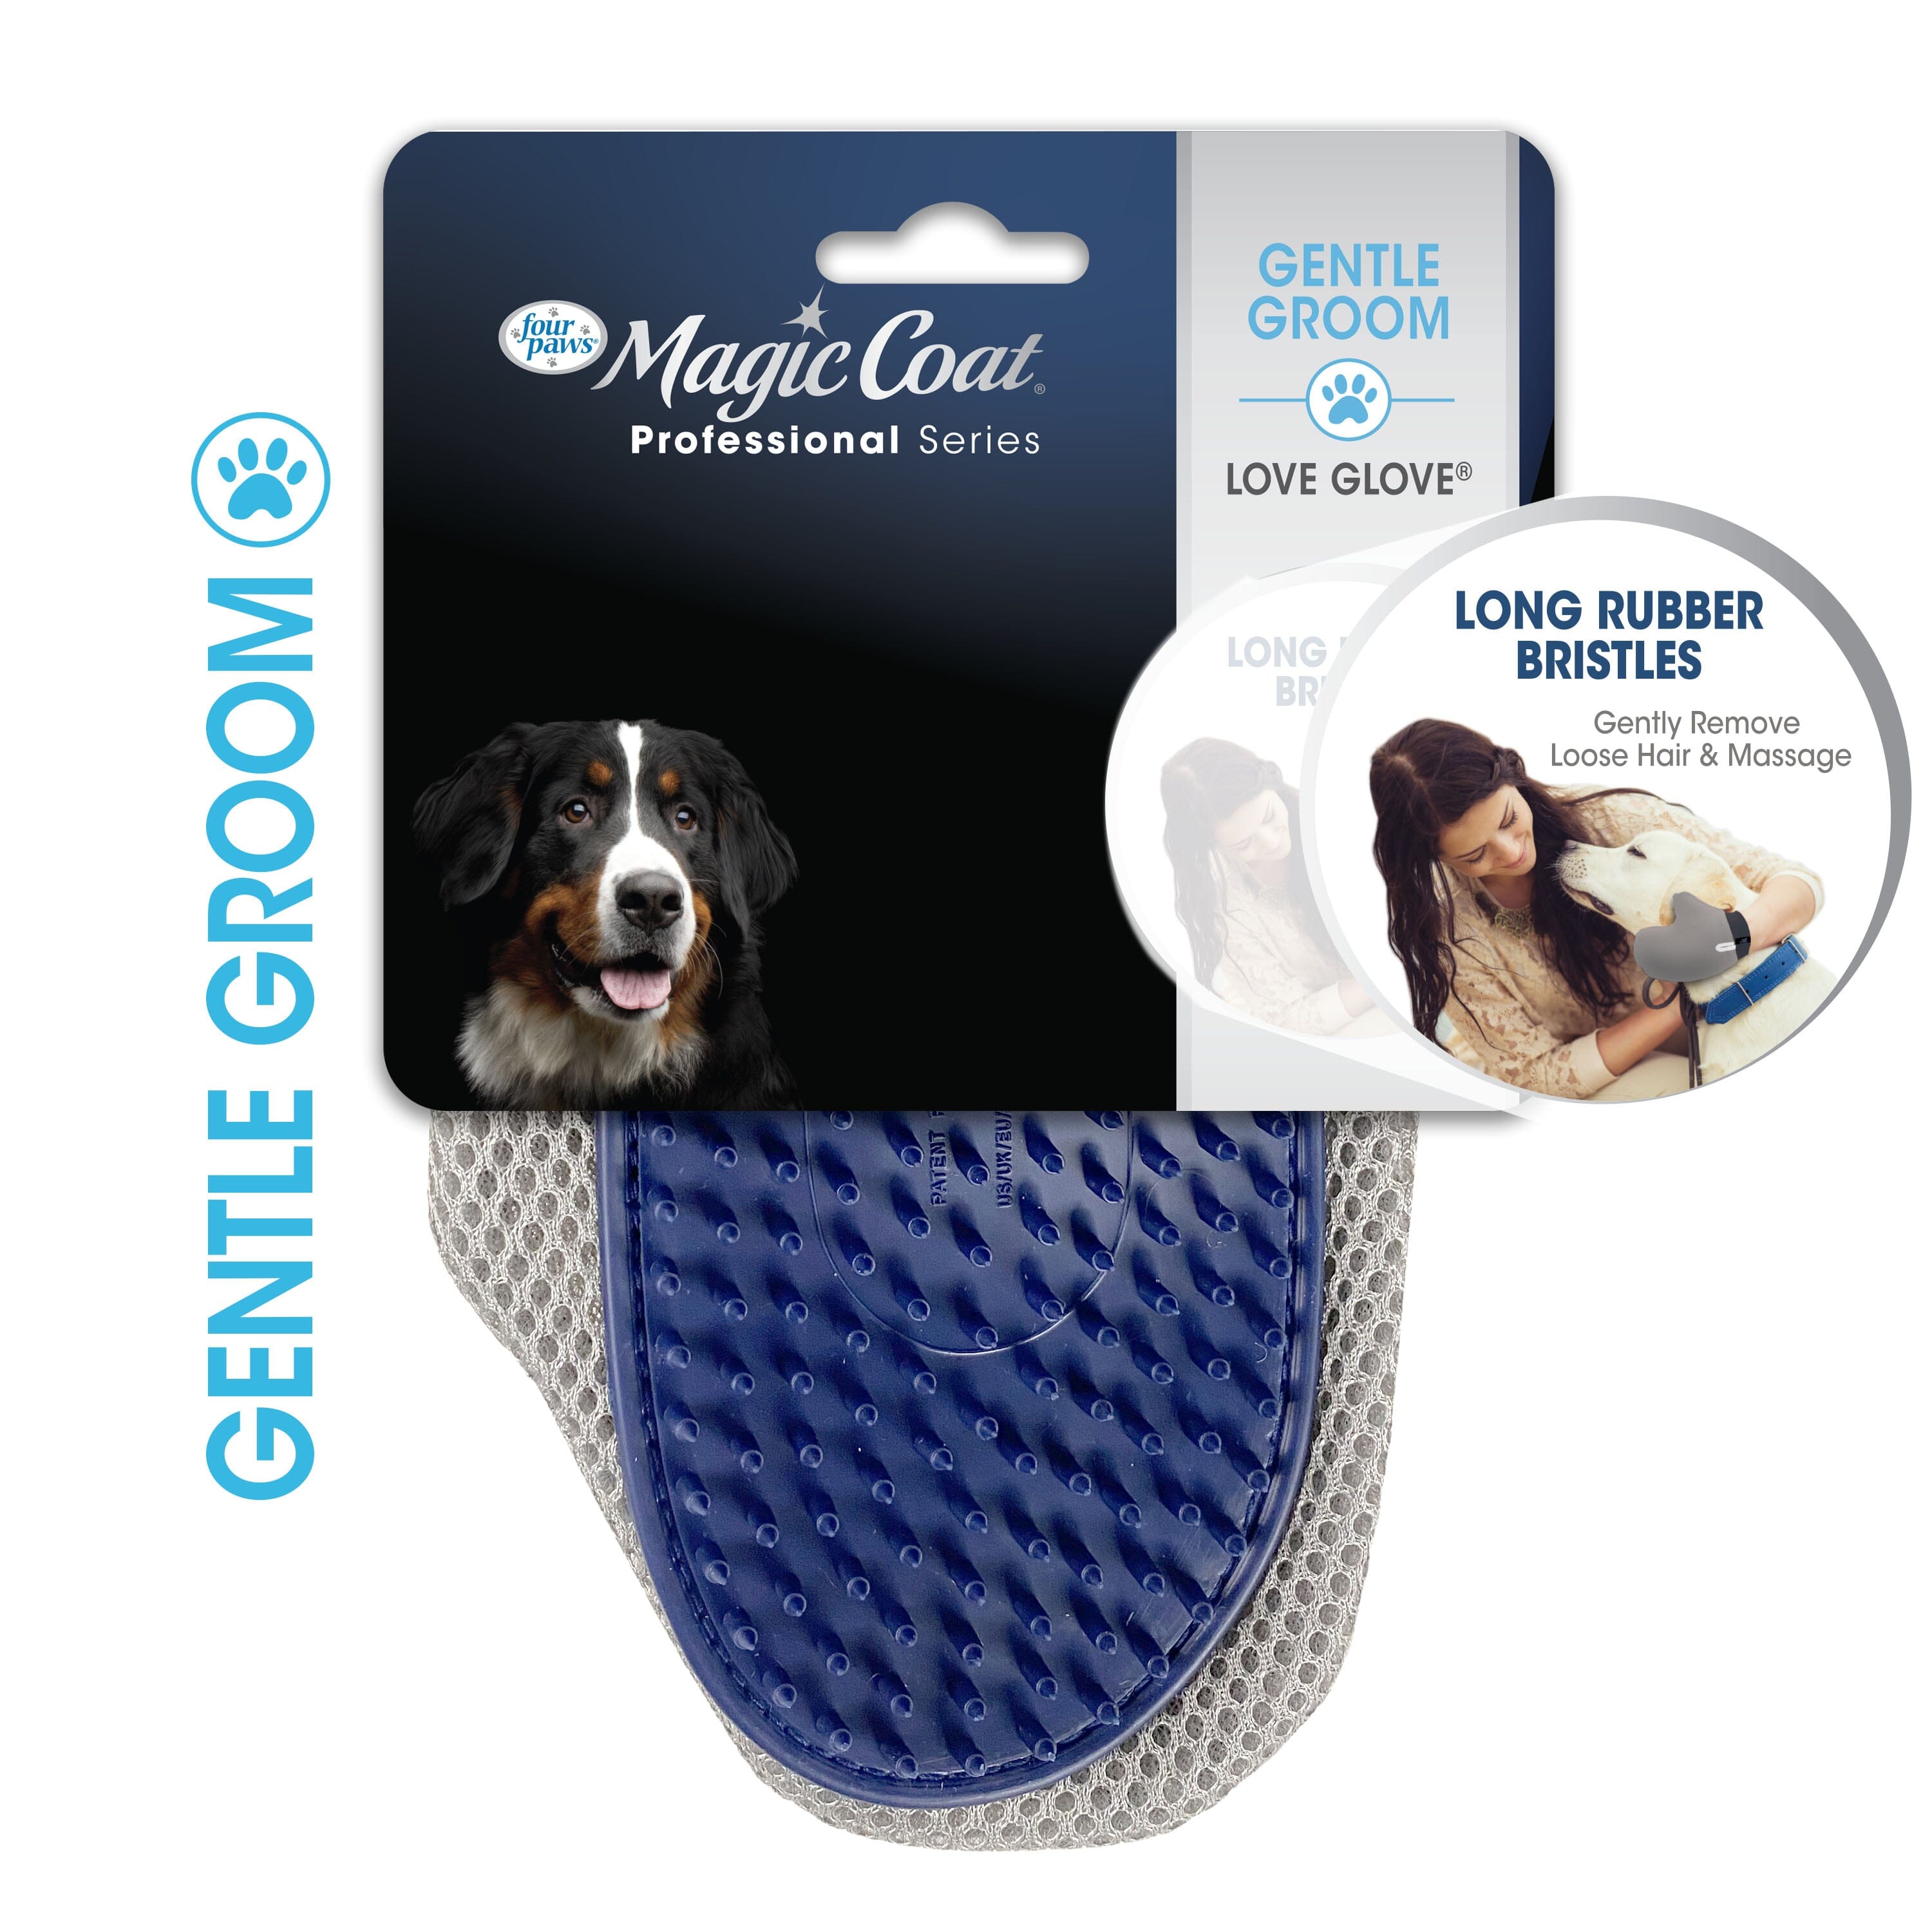 Four Paws Magic Coat Professional Series Love Glove Dog Grooming Mitt Grooming Mit - One Size  